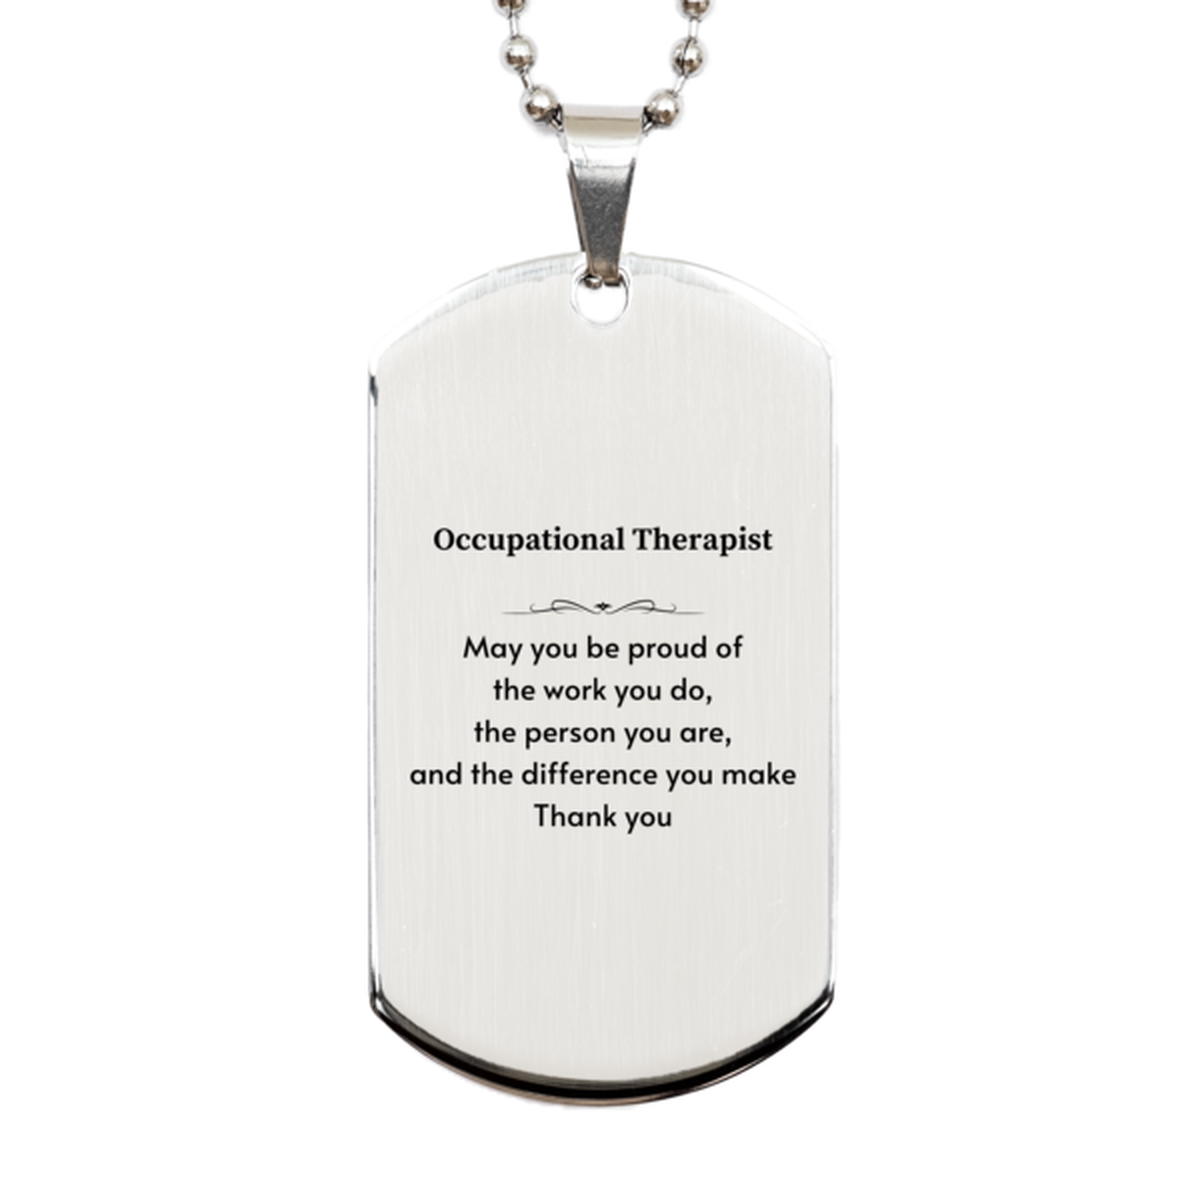 Heartwarming Silver Dog Tag Retirement Coworkers Gifts for Occupational Therapist, Occupational Therapist May You be proud of the work you do, the person you are Gifts for Boss Men Women Friends